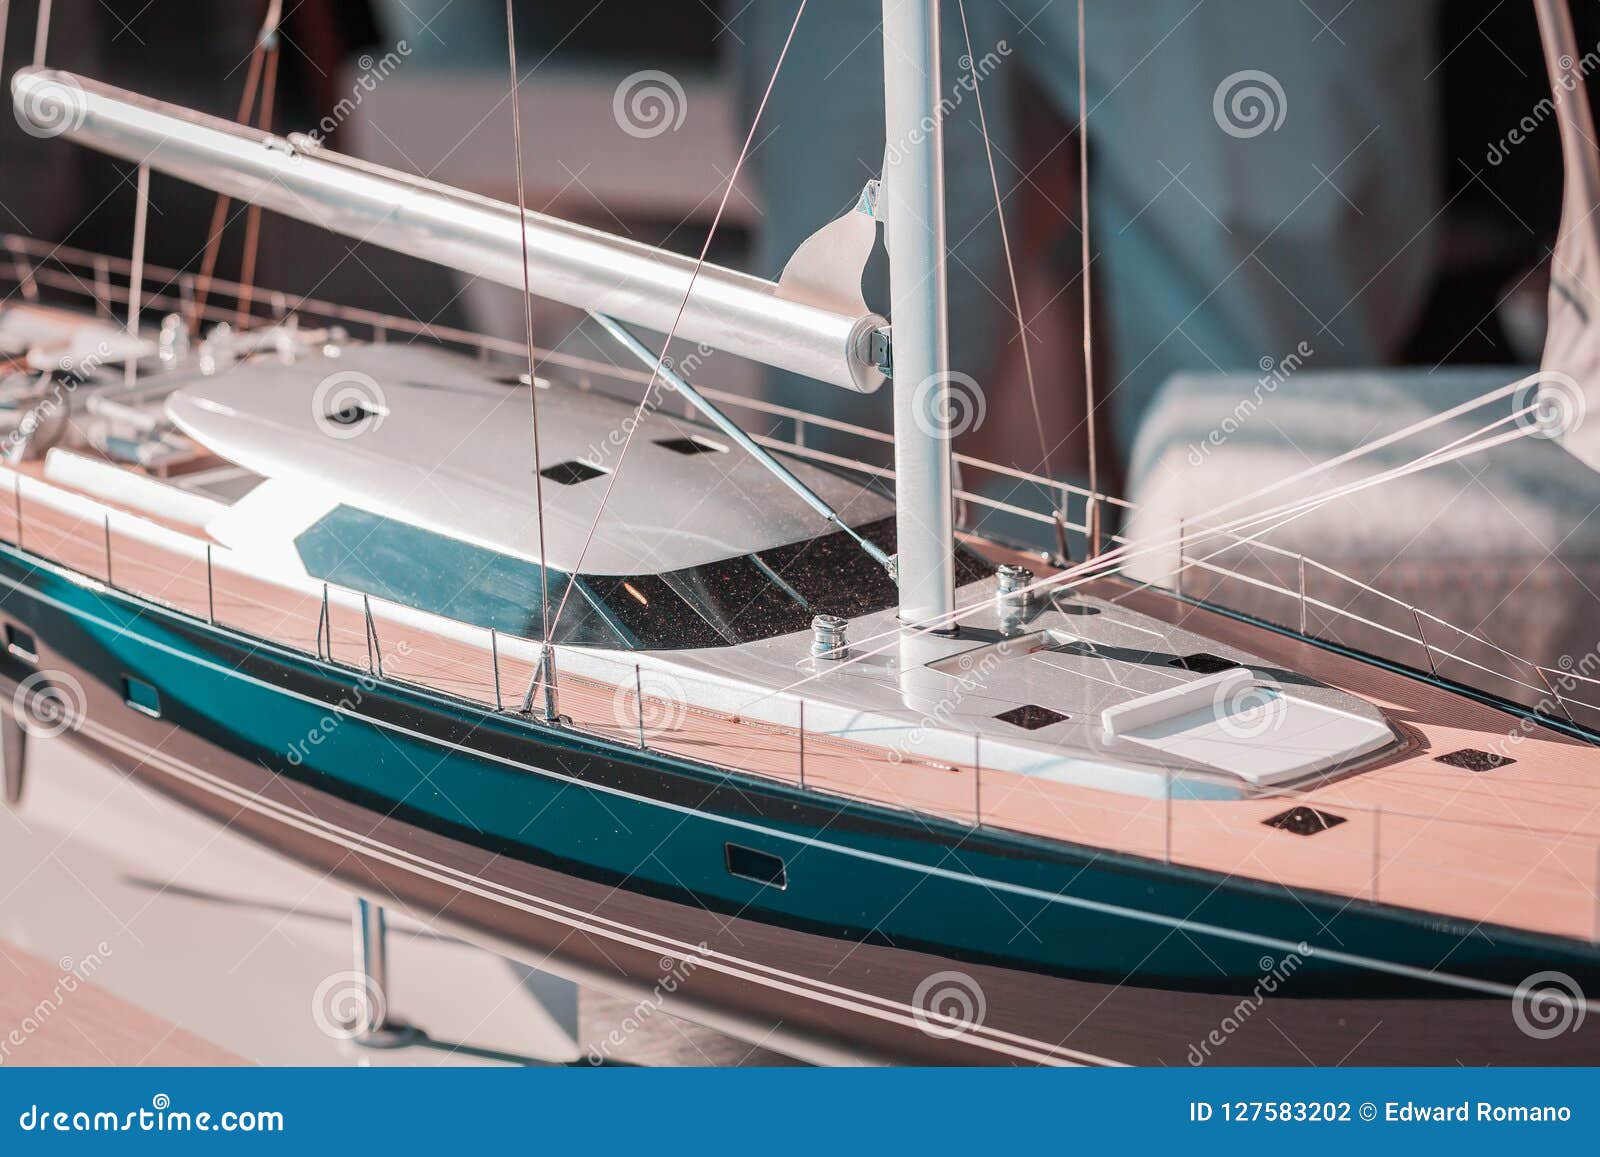 luxury, in scale, model yachts. sailing life, big projects